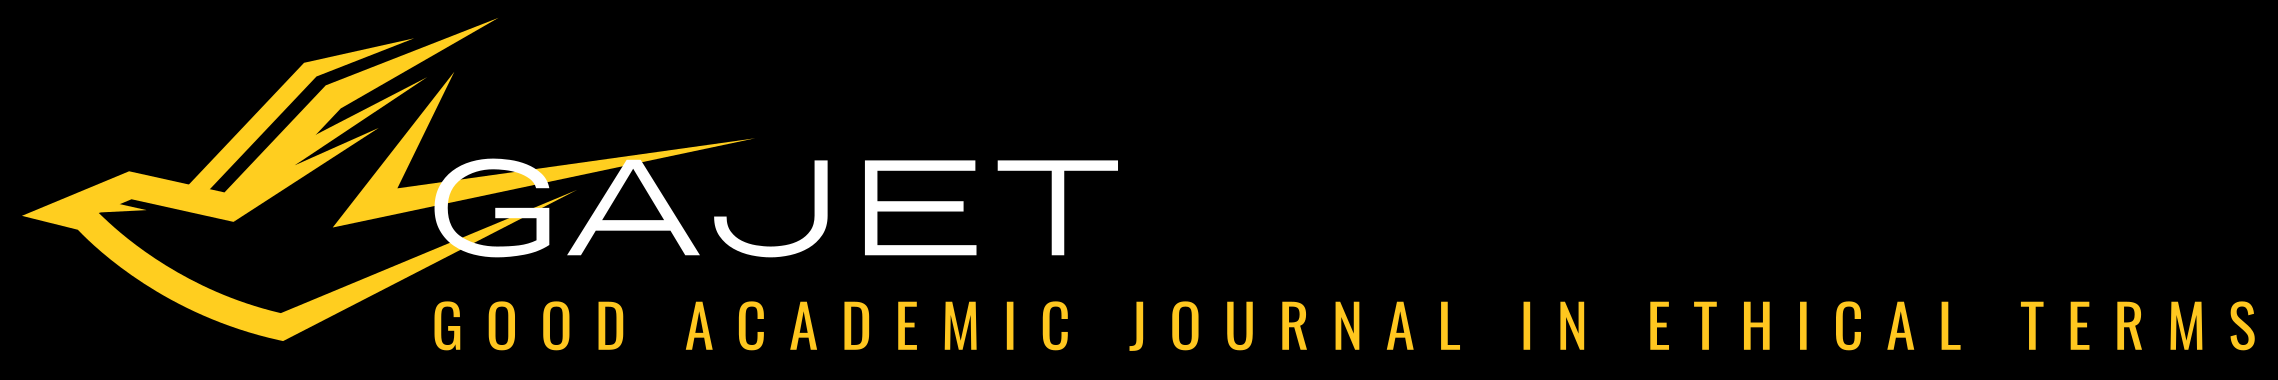 GAJET: List Good Academic Journal in Ethical Terms